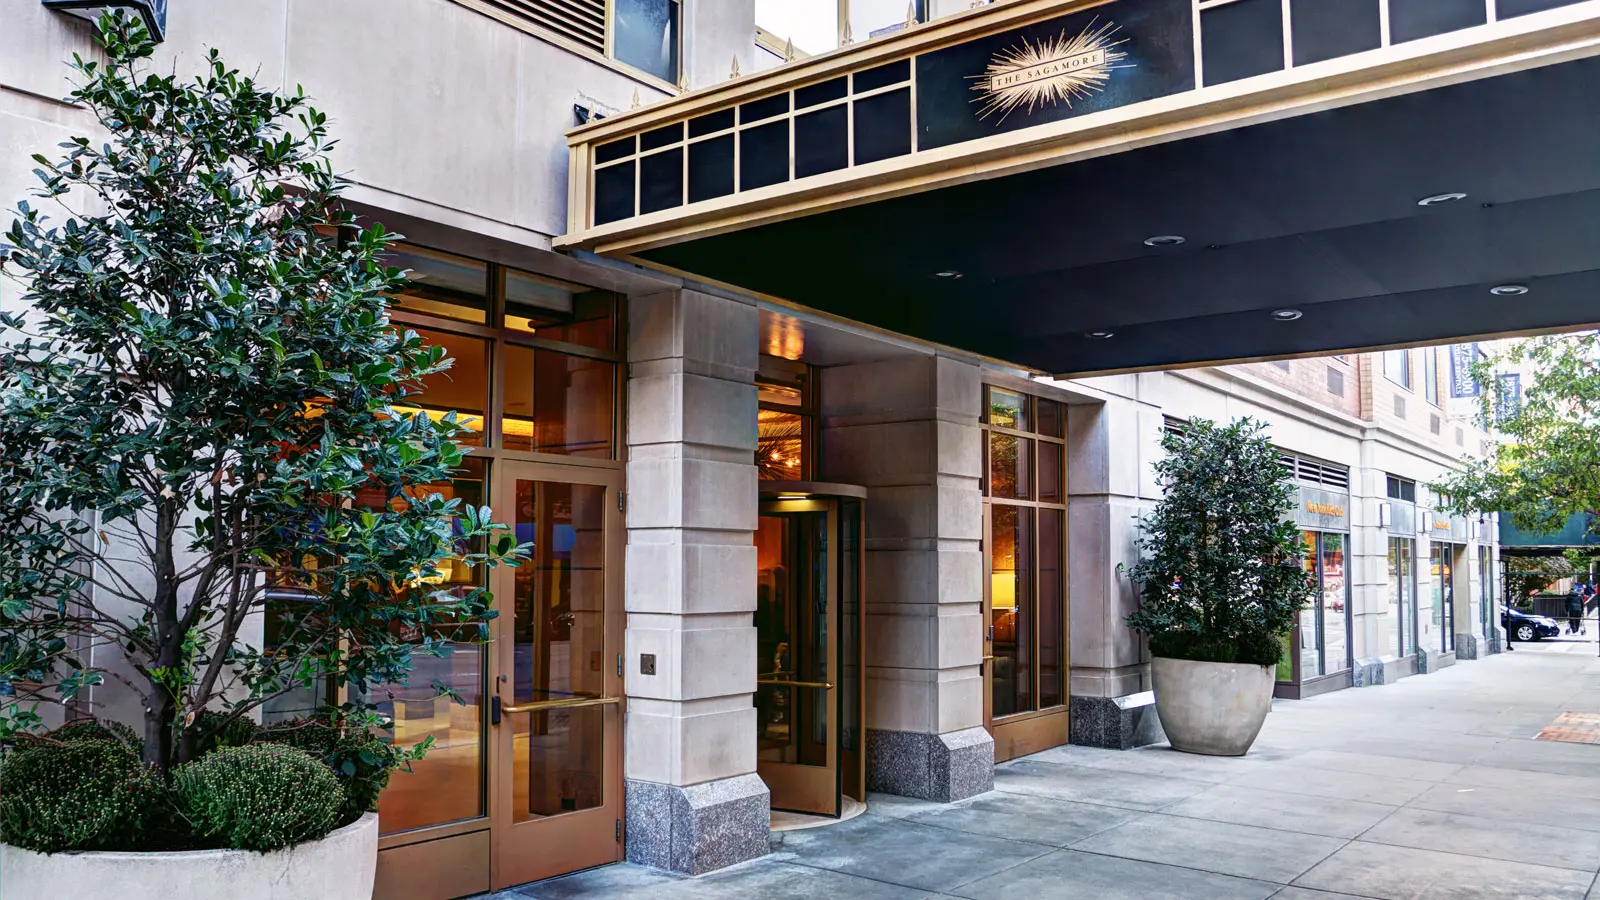 The Sagamore, 189 West 89th Street